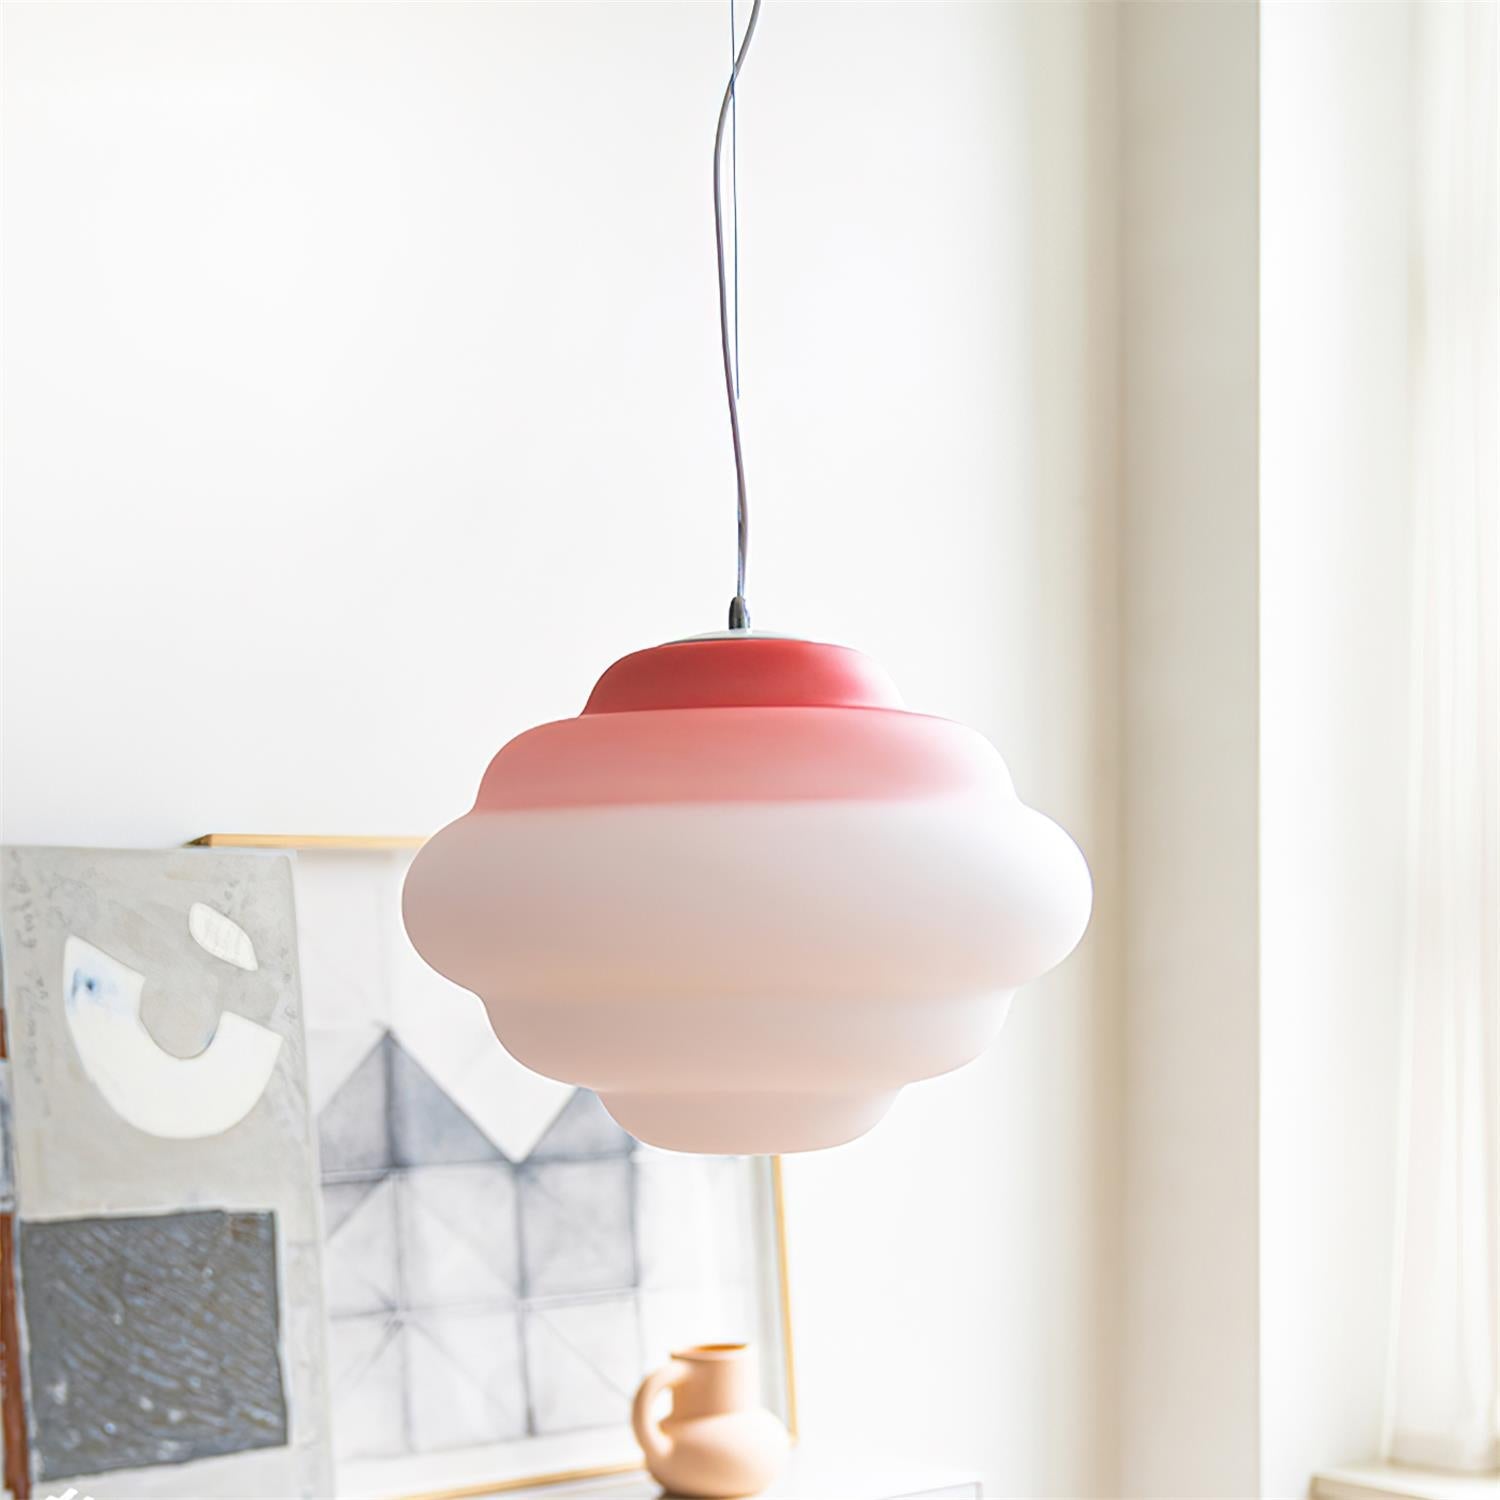 Colorful Striped Pendant Lamps: Playfulness and Style in Lighting